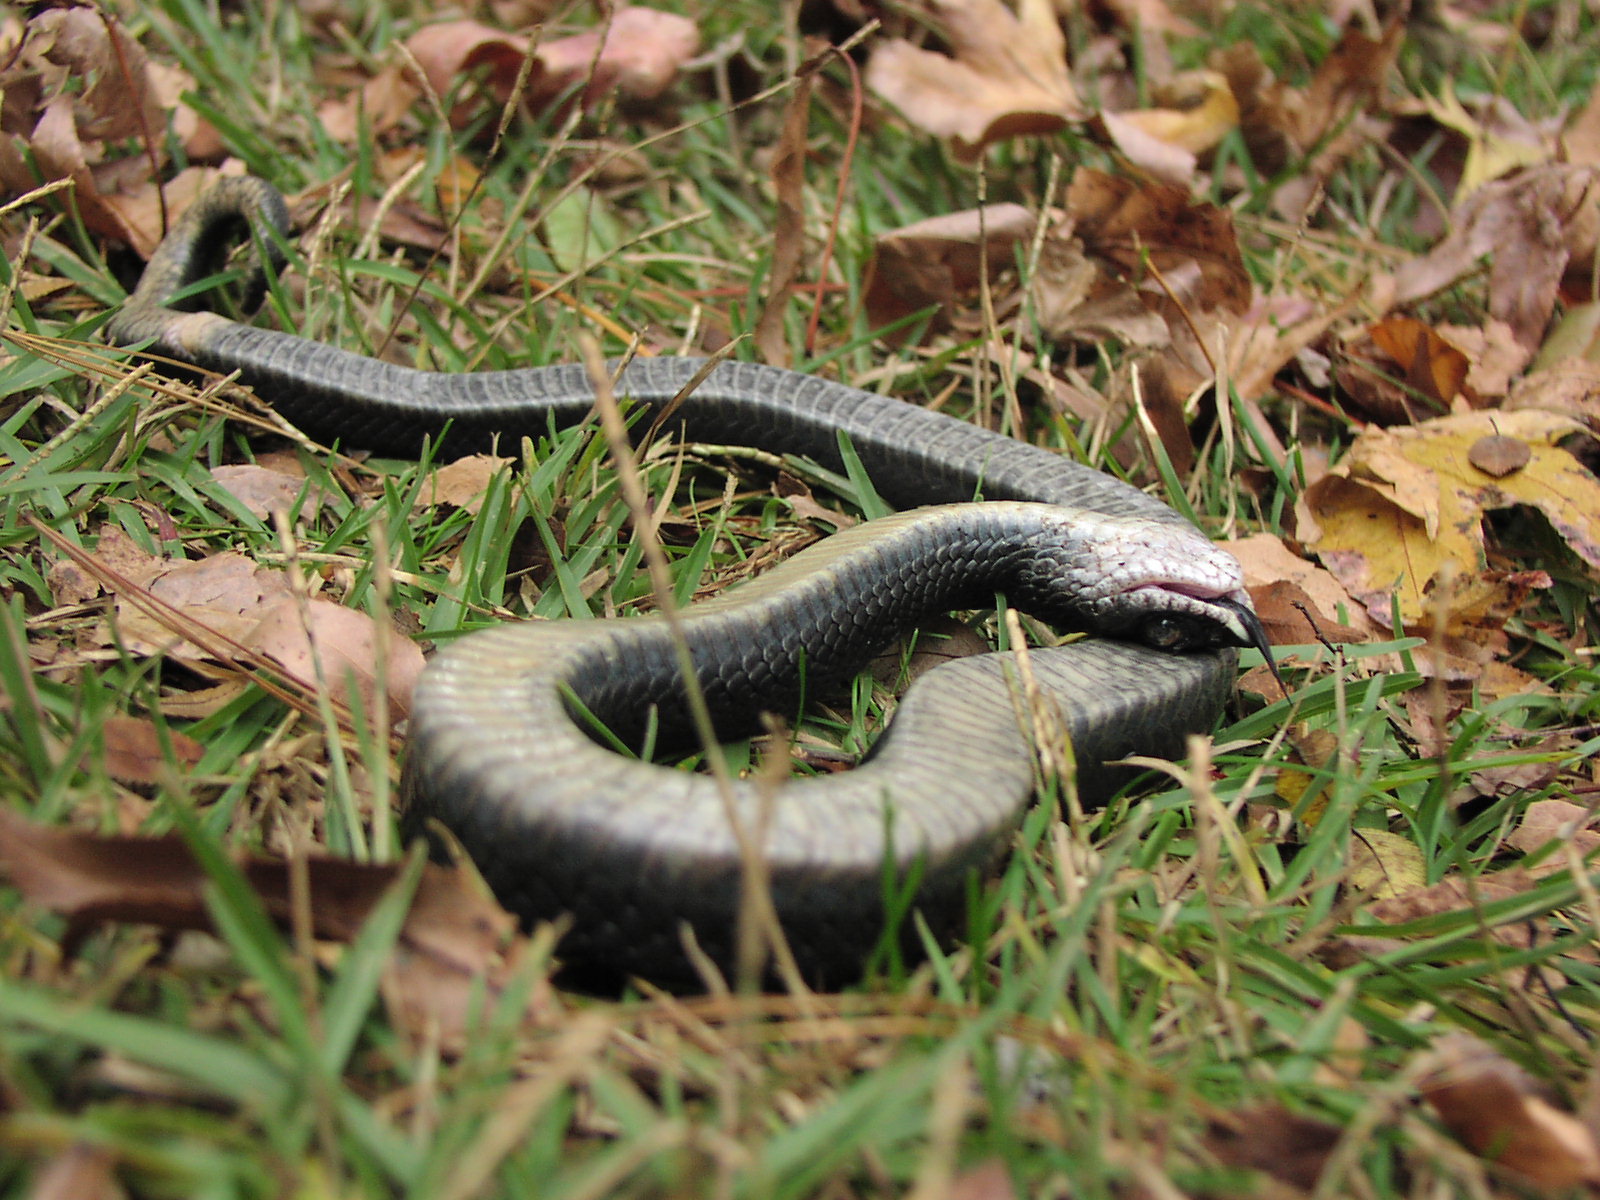 What can we learn from a snake playing dead?